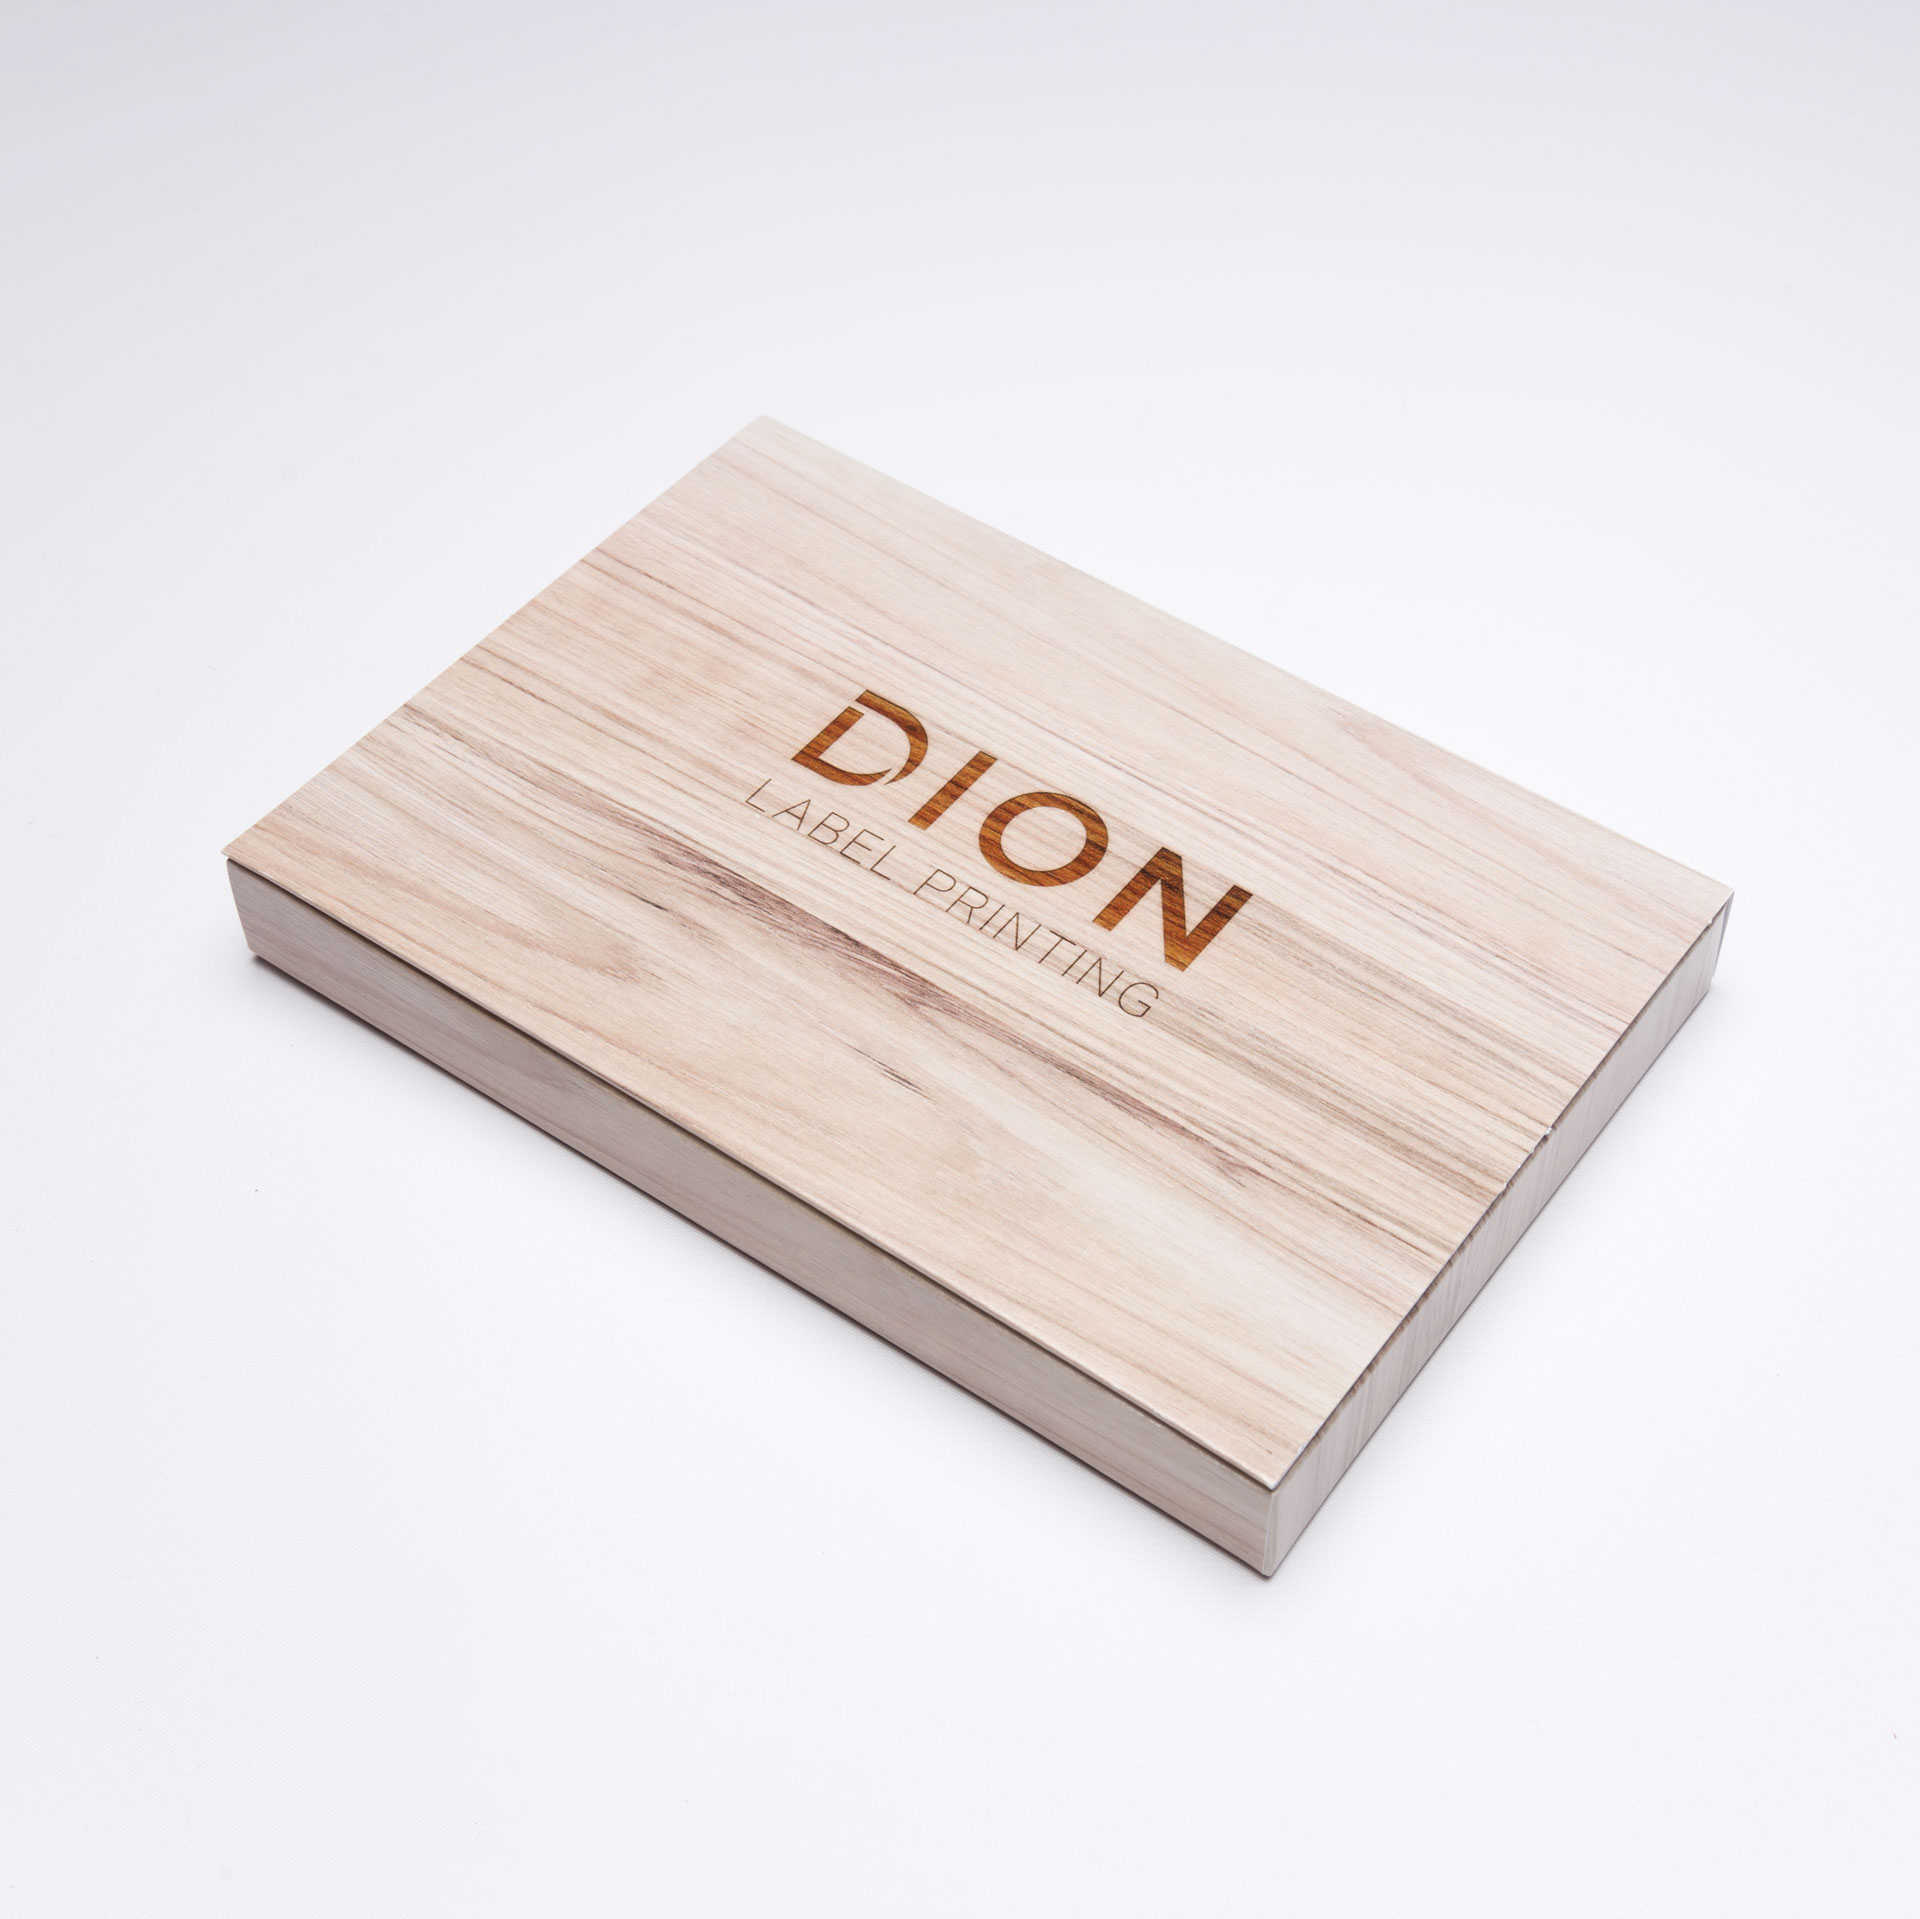 DION Label Printing Impresses Potential Customers Using the Large Well Box